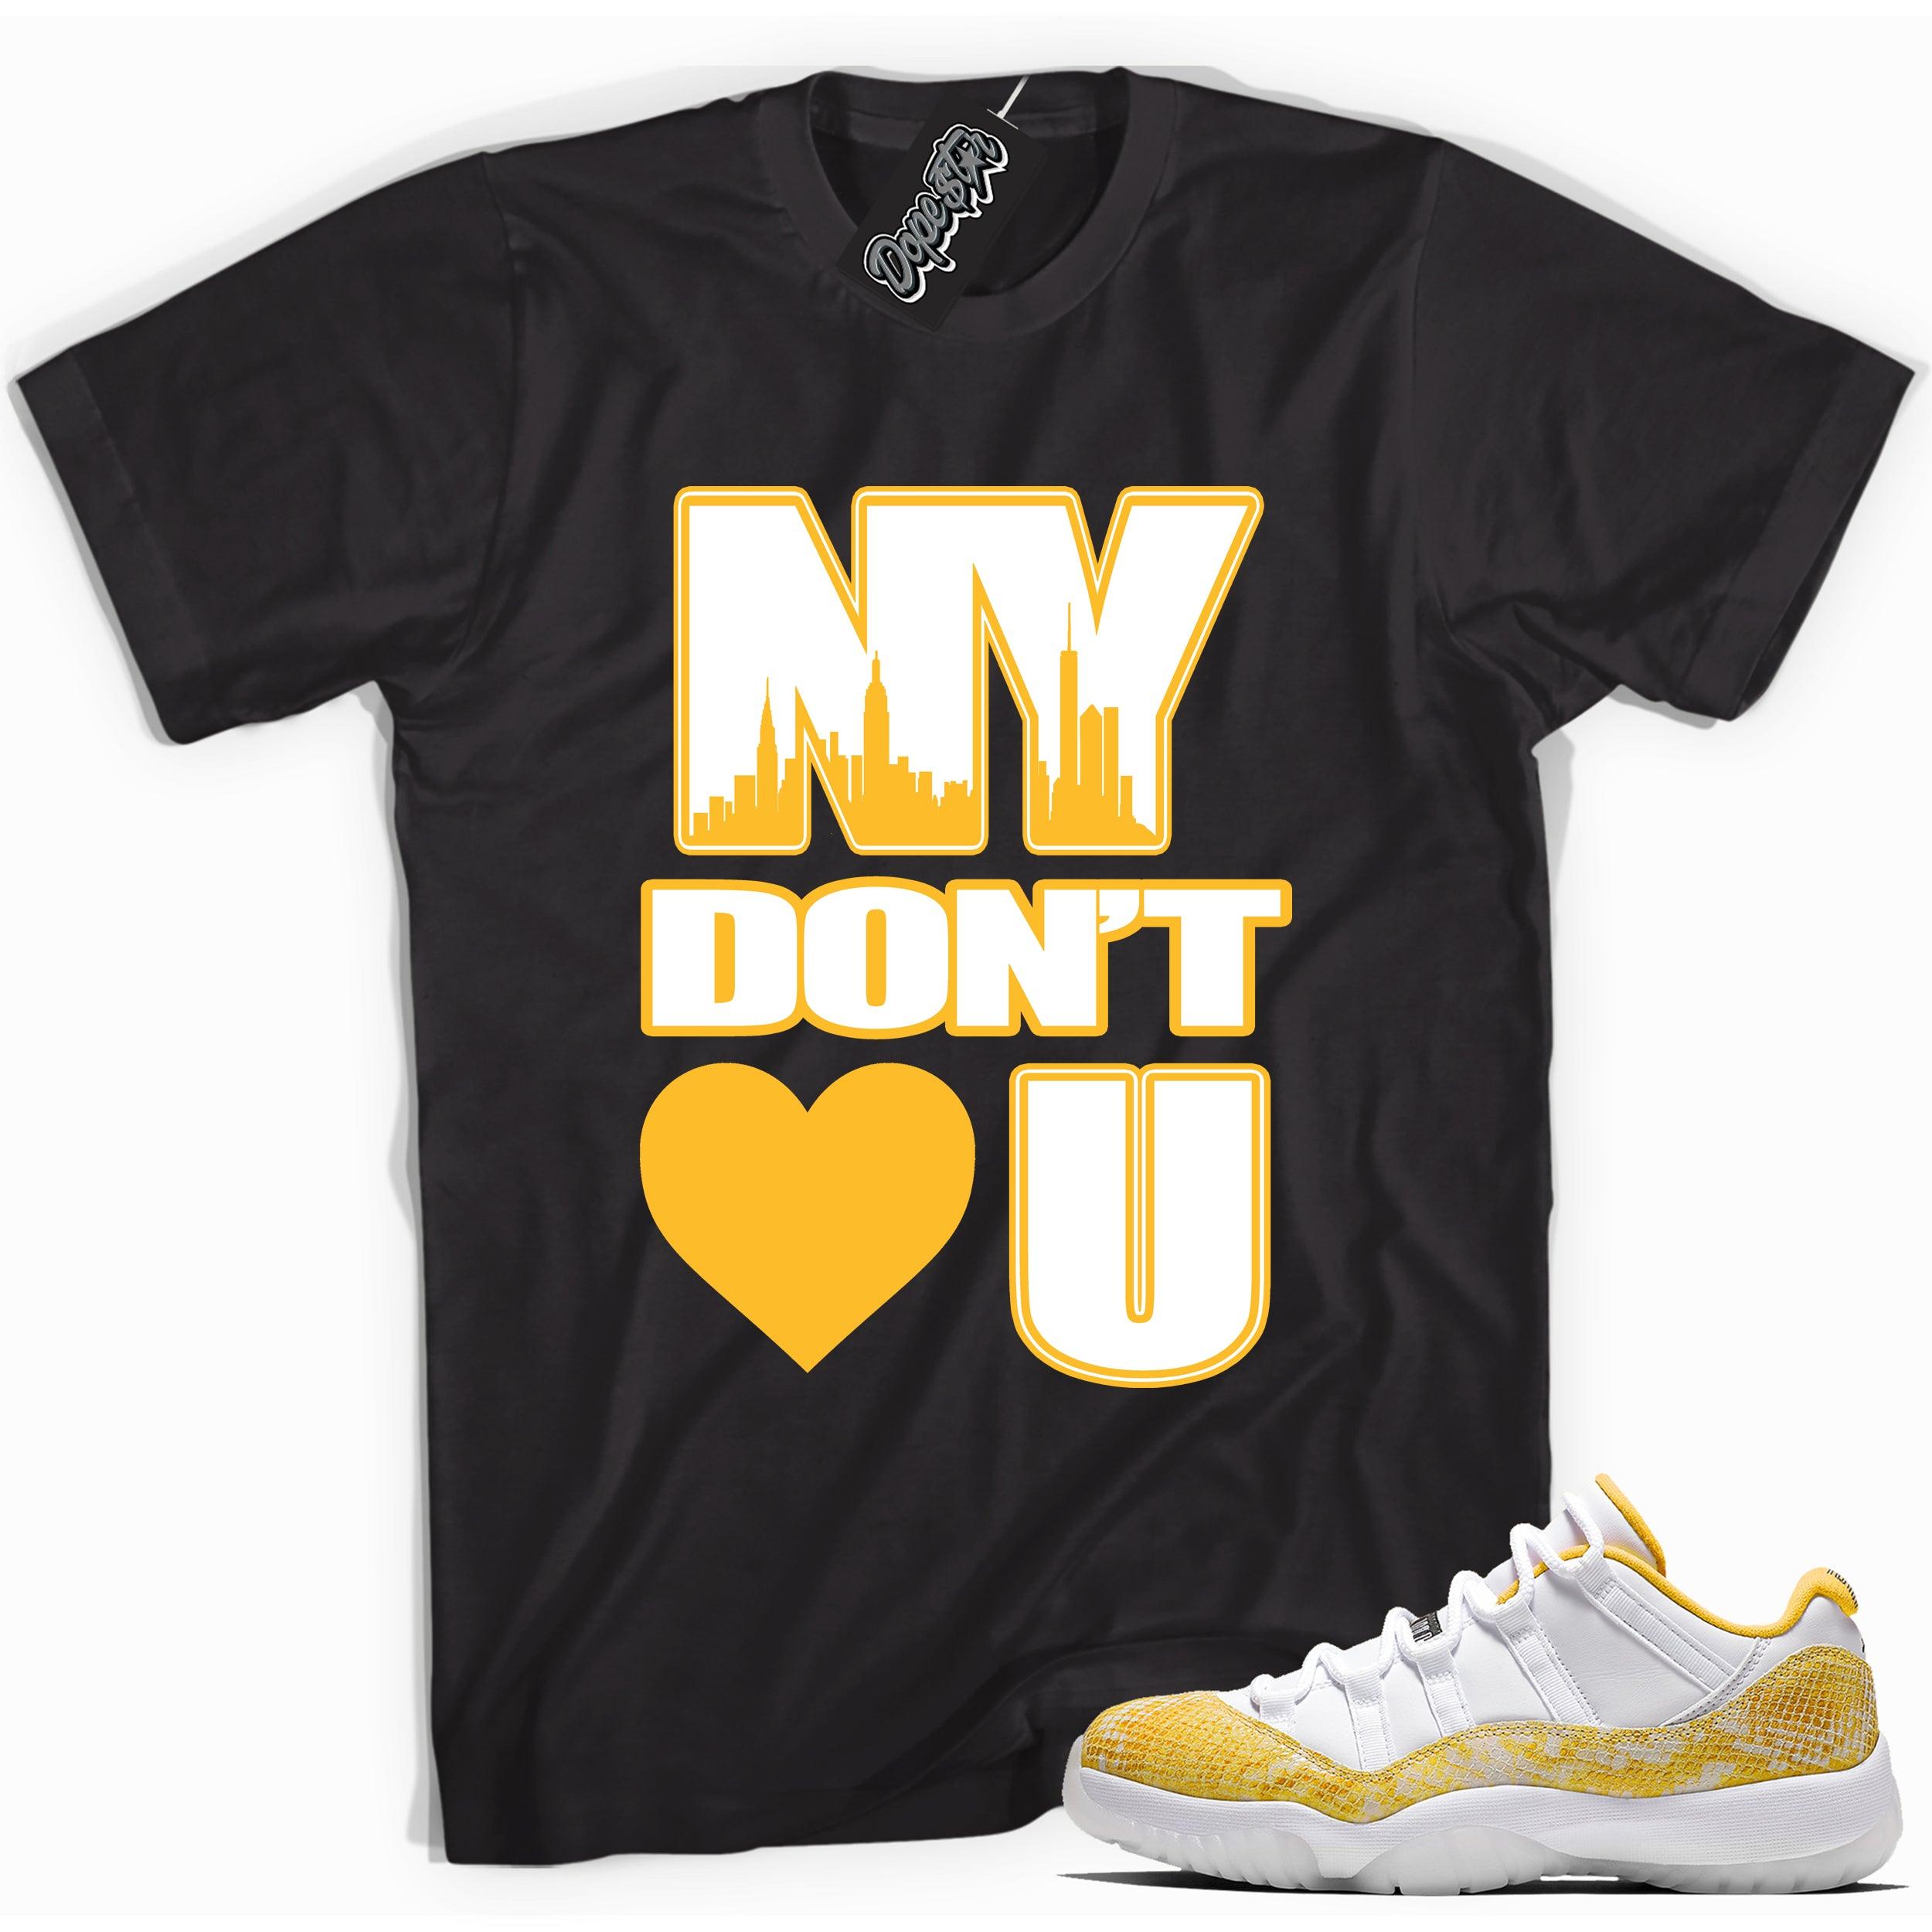 Cool black graphic tee with 'NY Don't <3 U' print, that perfectly matches  Air Jordan 11 Low Yellow Snakeskin sneakers